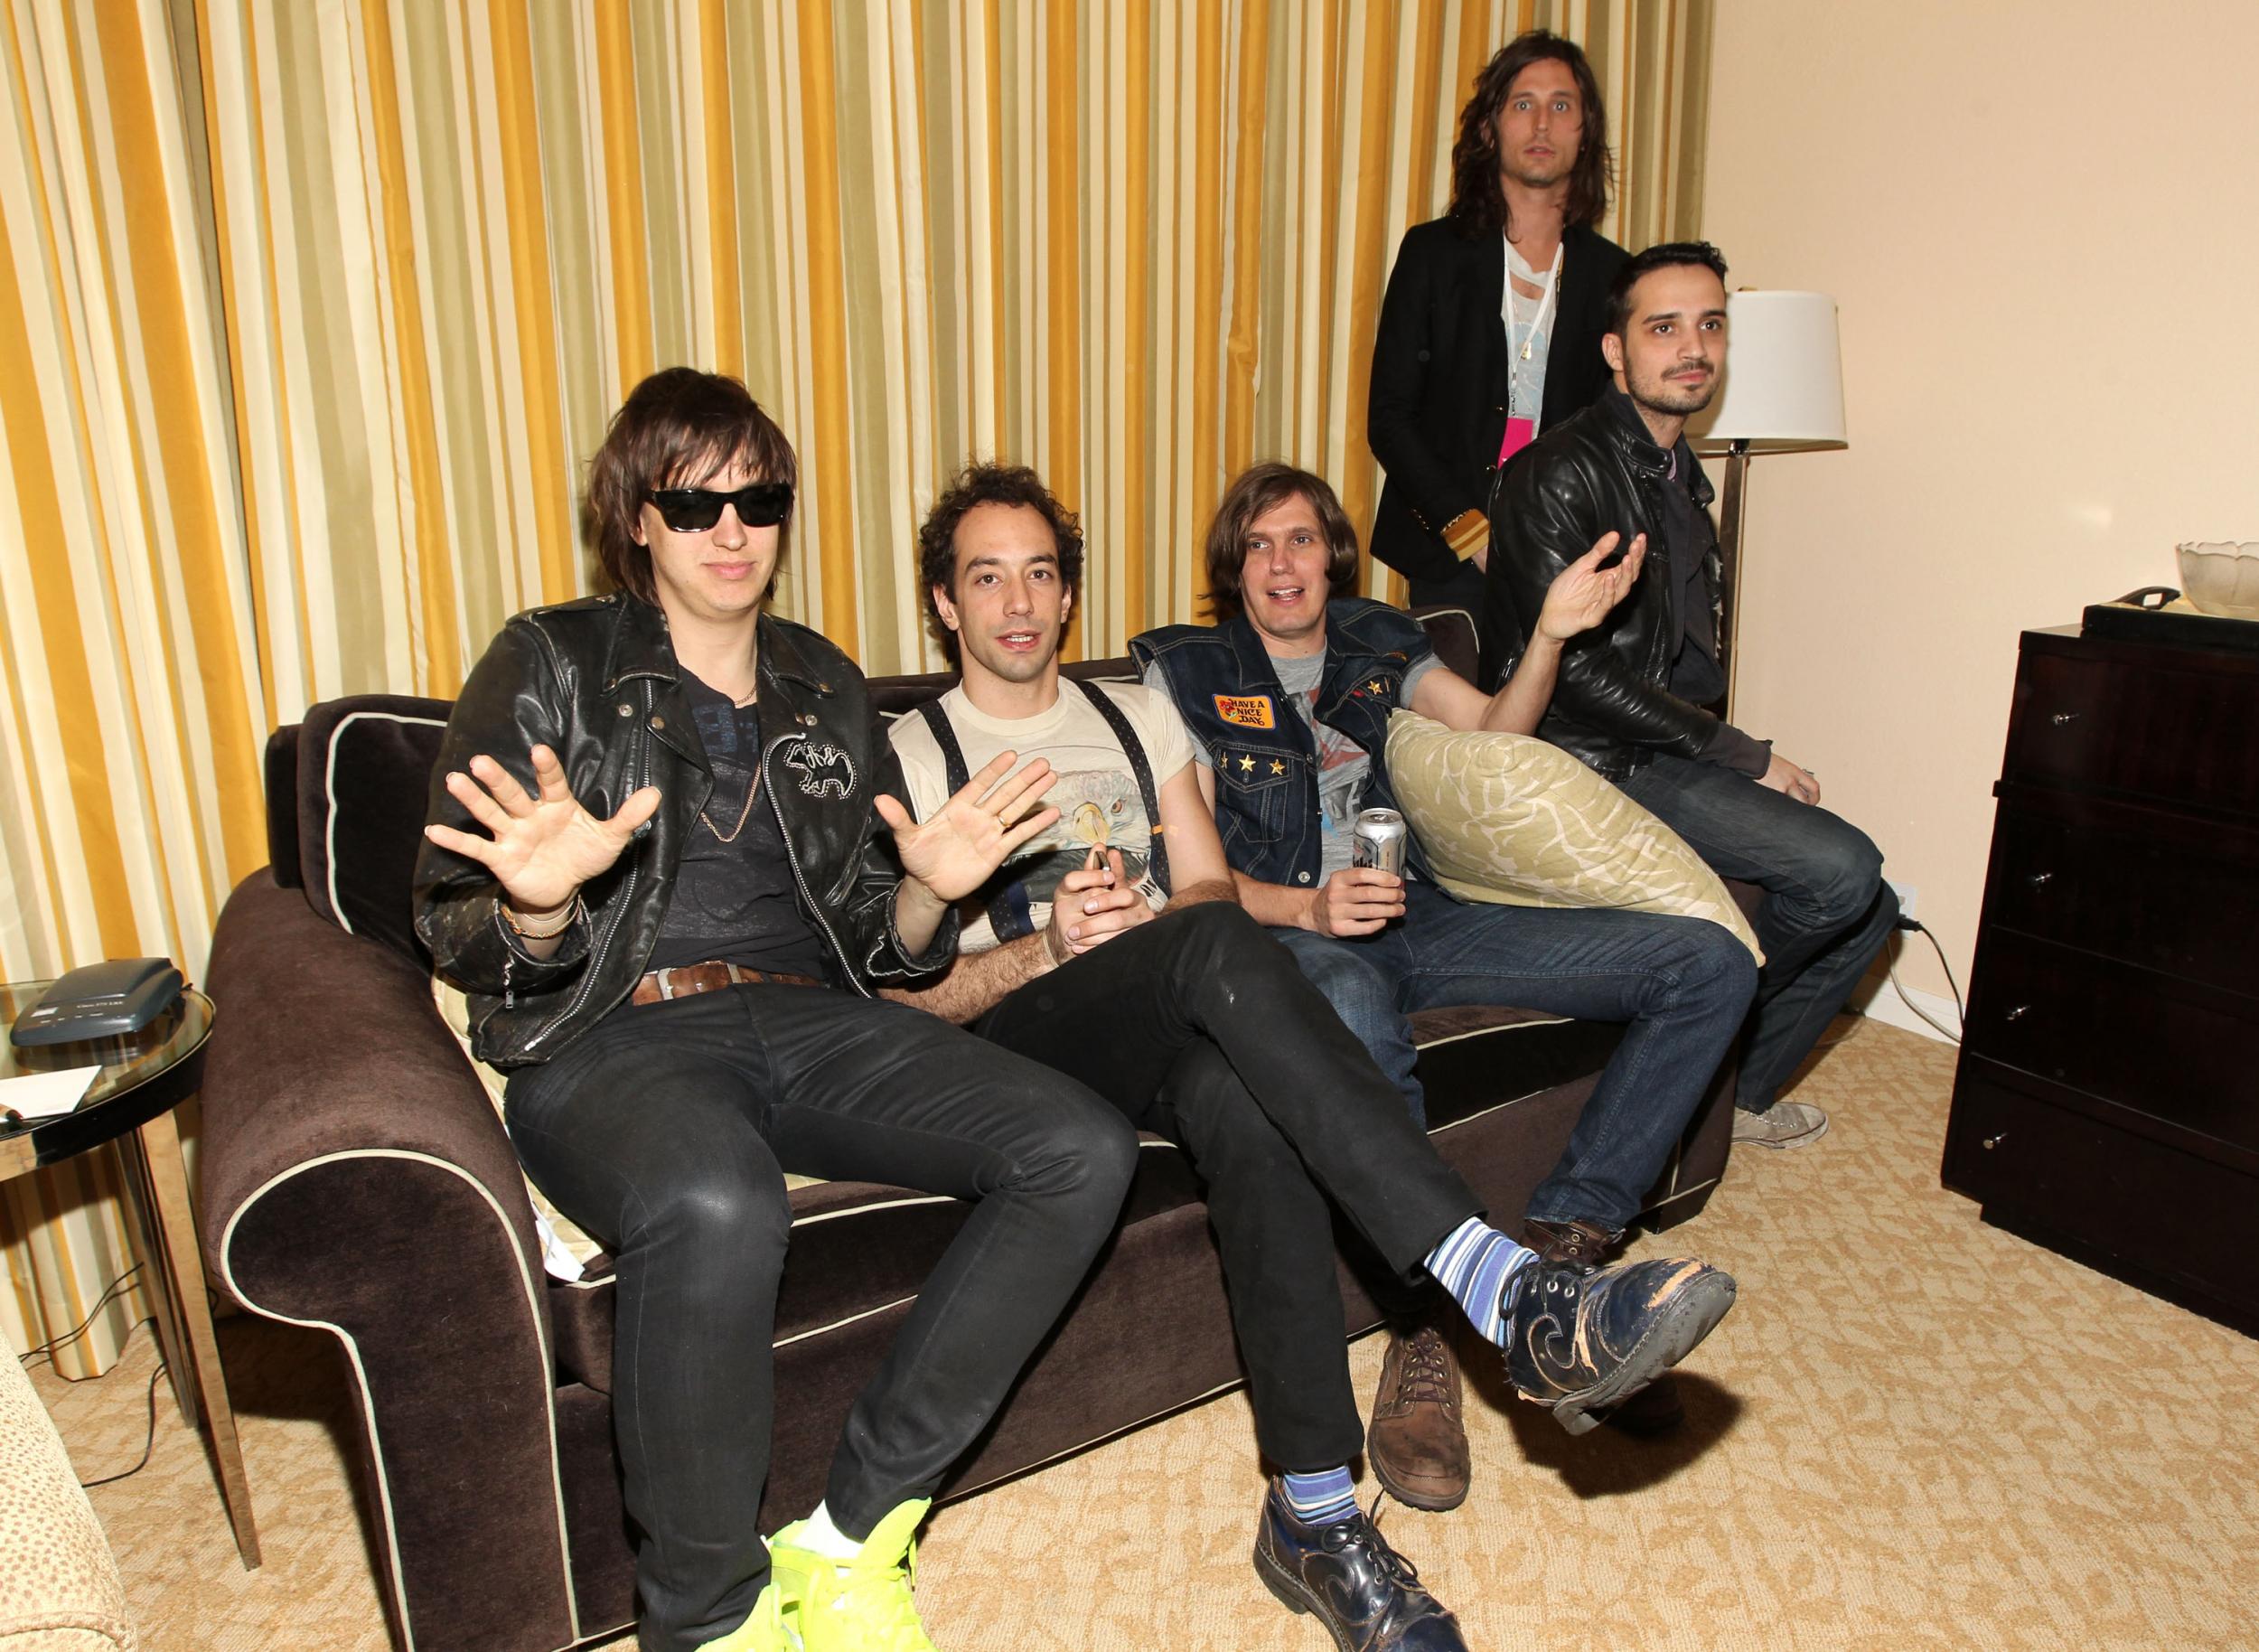 The Strokes' Best Songs, Ranked